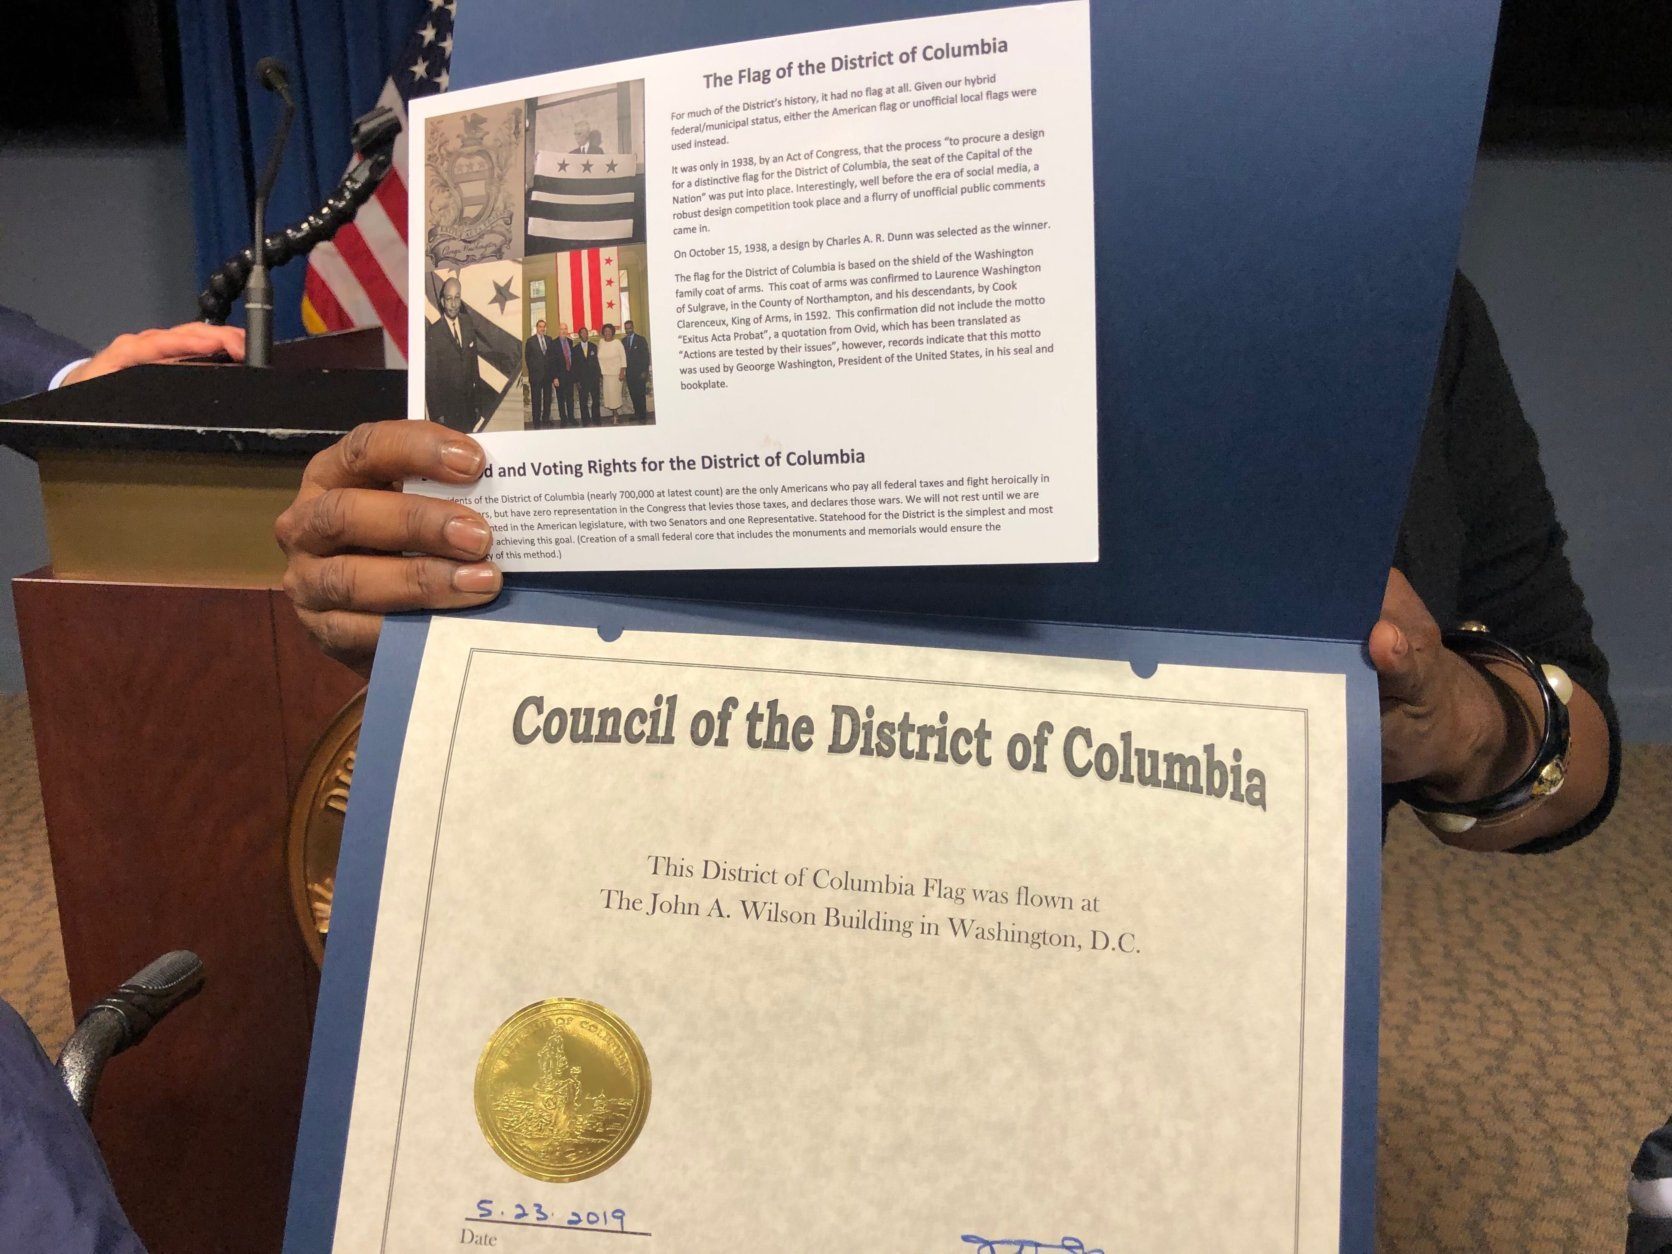 Leroy Tonic, 95, receives a certificate honoring his service in World War II and his work in the D.C. government. (WTOP/Kristi King)